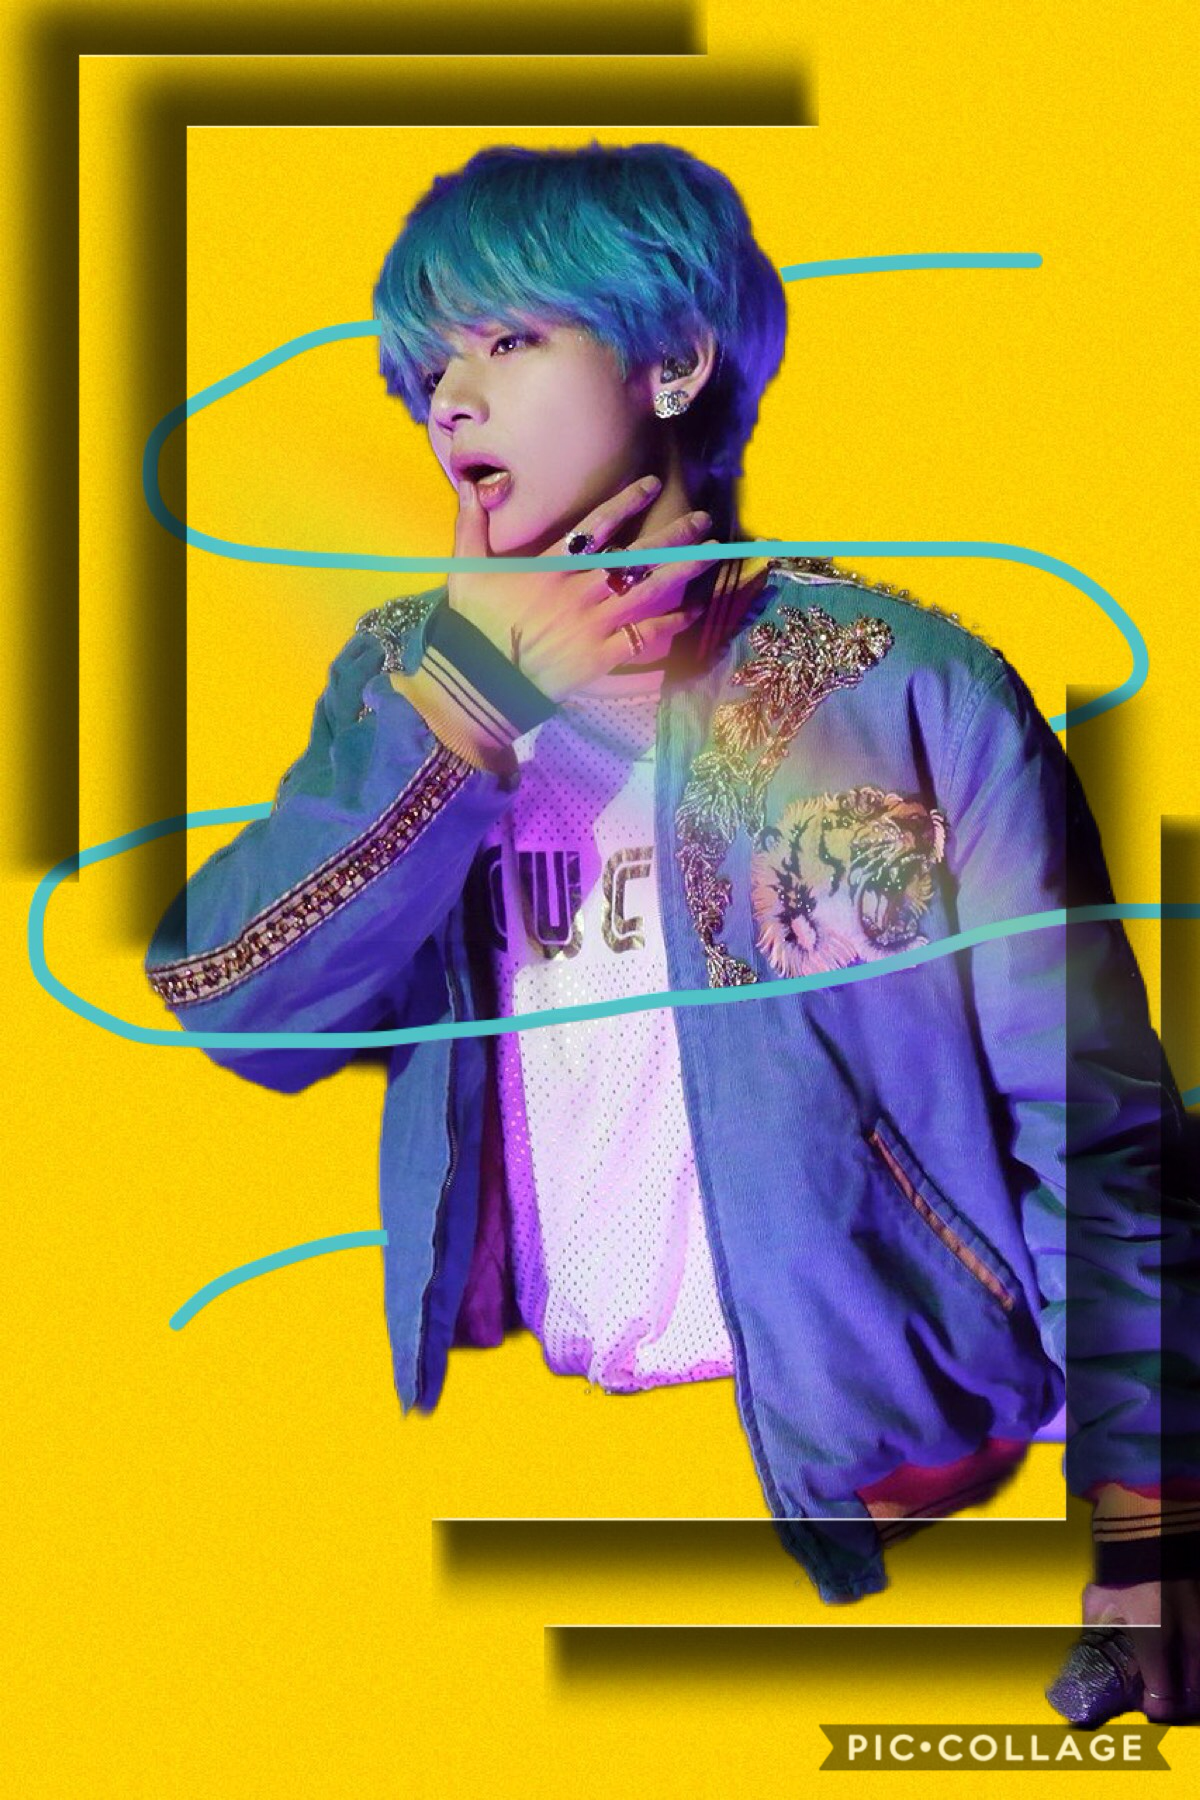 *💙*
Dang tae! I mean wowie 😅! It's not that good of collage but tae looks really good anyway. Did anyone buy concert tickets for speak yourself yet?